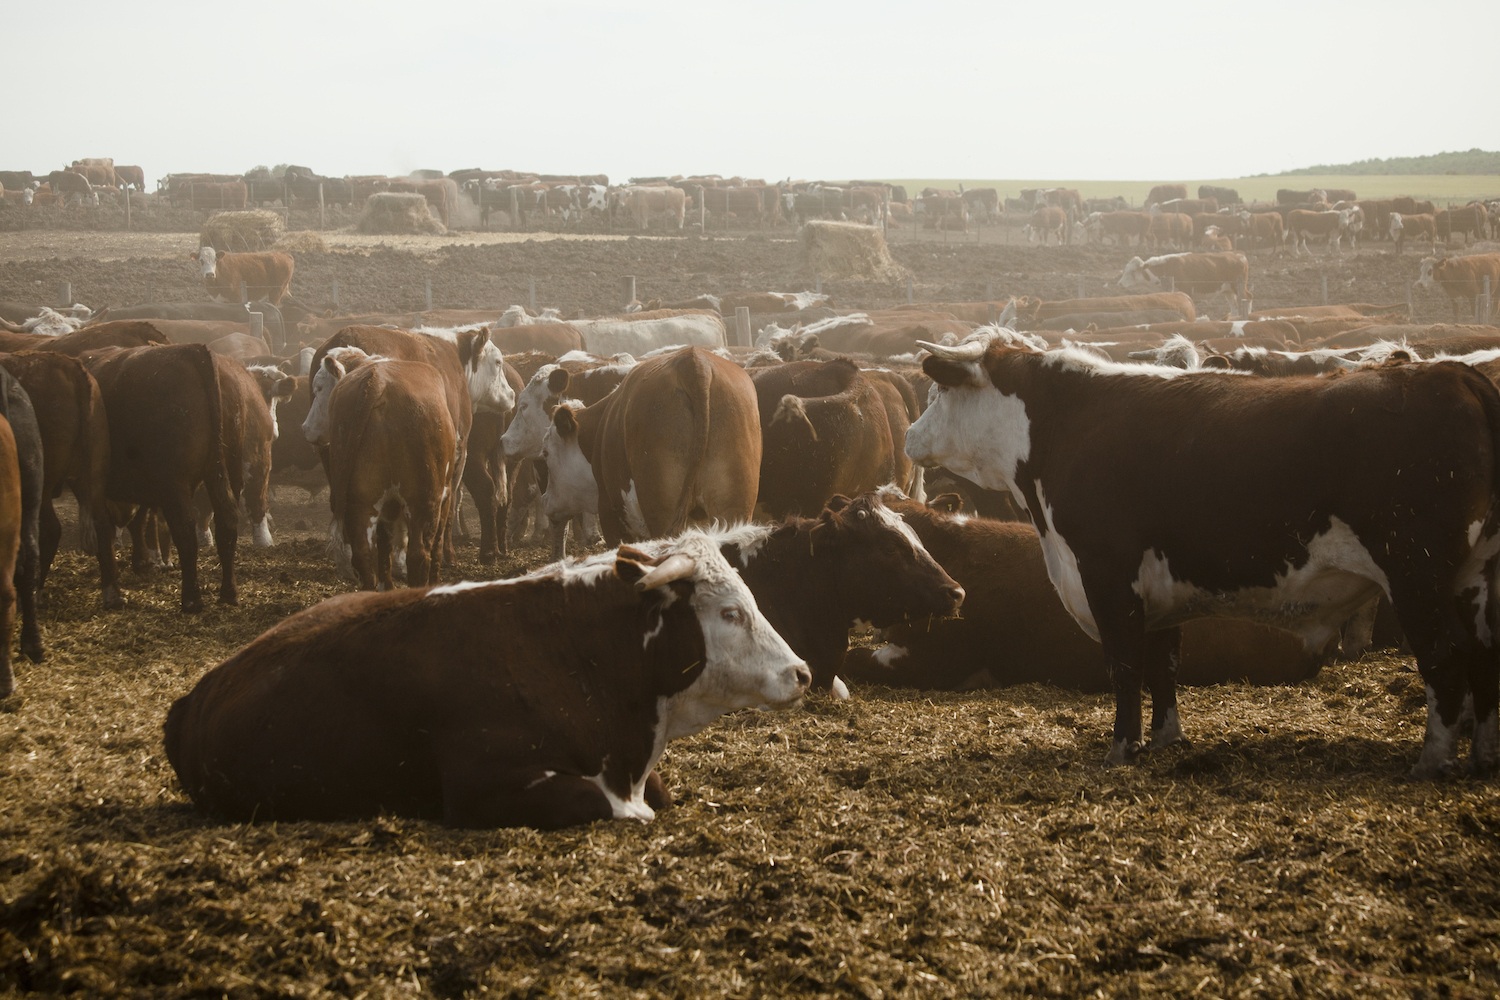 cattle feedlot future of meat supply covid-19 April 2020